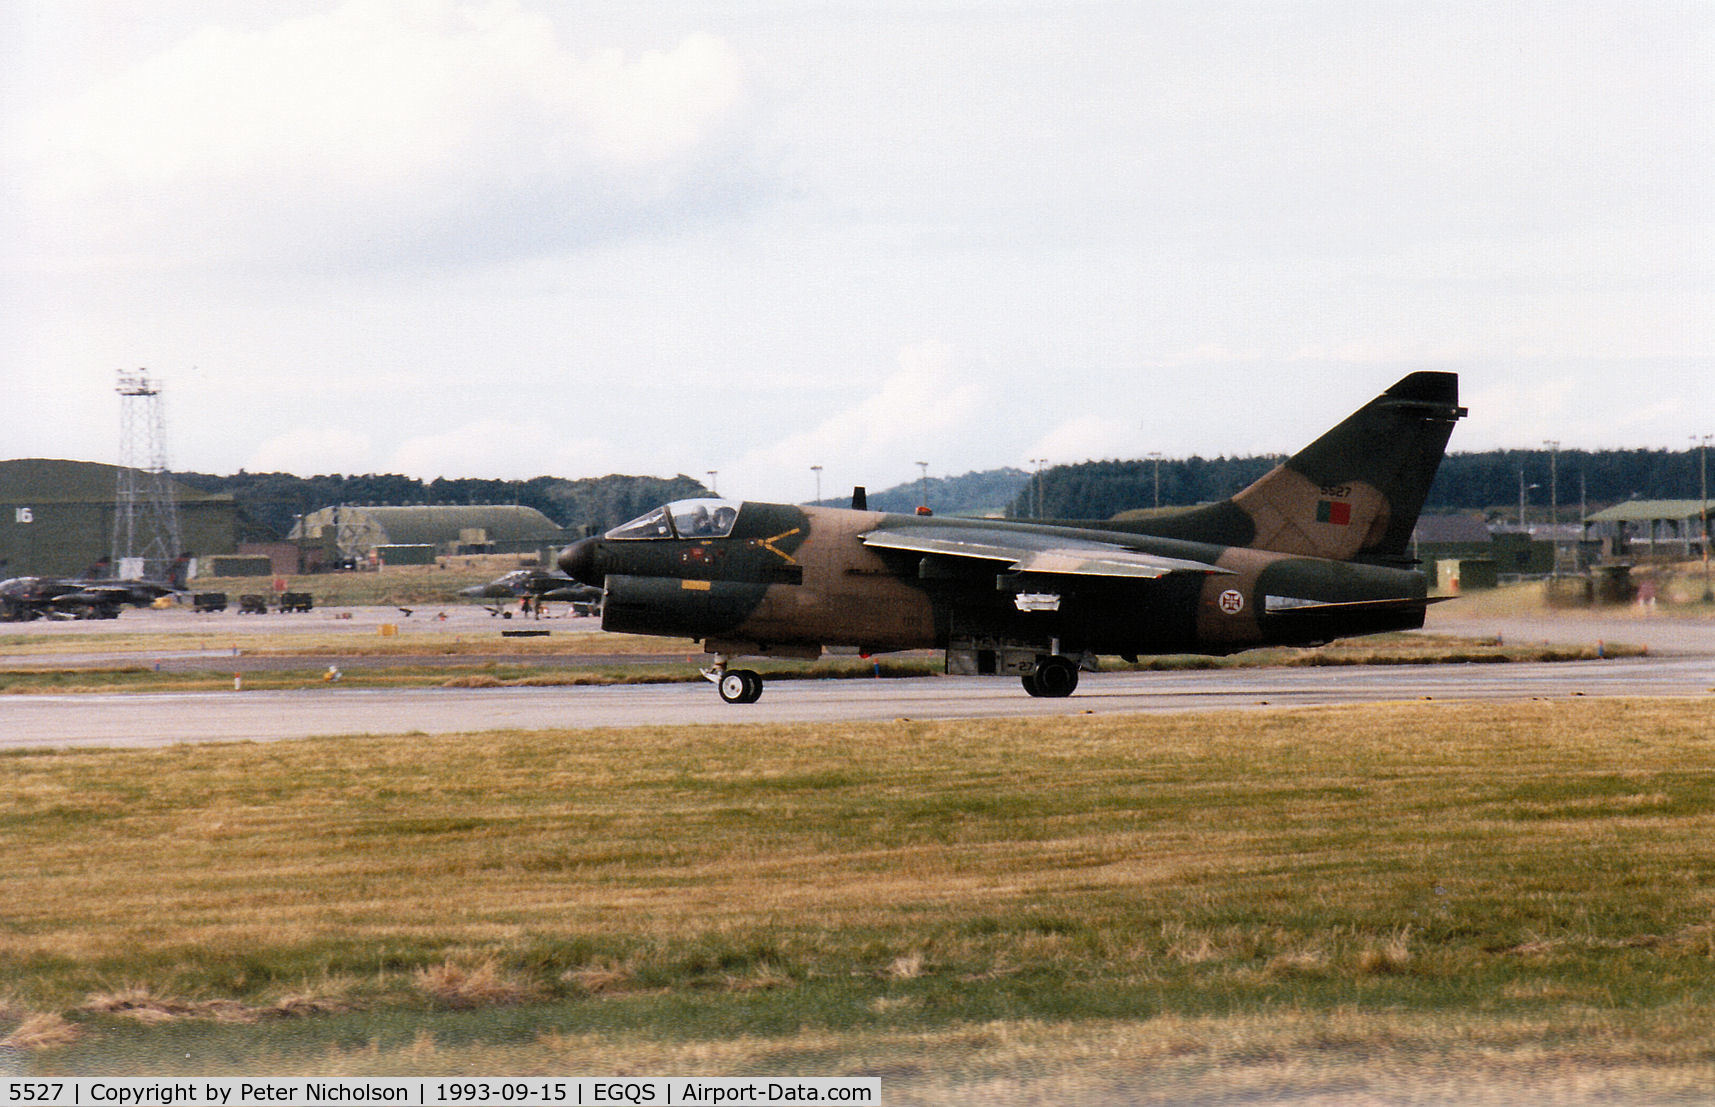 5527, LTV A-7P Corsair II C/N A-088, Portuguese Air Force A-7P Corsair II of 304 Esquadron lining up on Runway 05 at RAF Lossiemouth in September 1993.